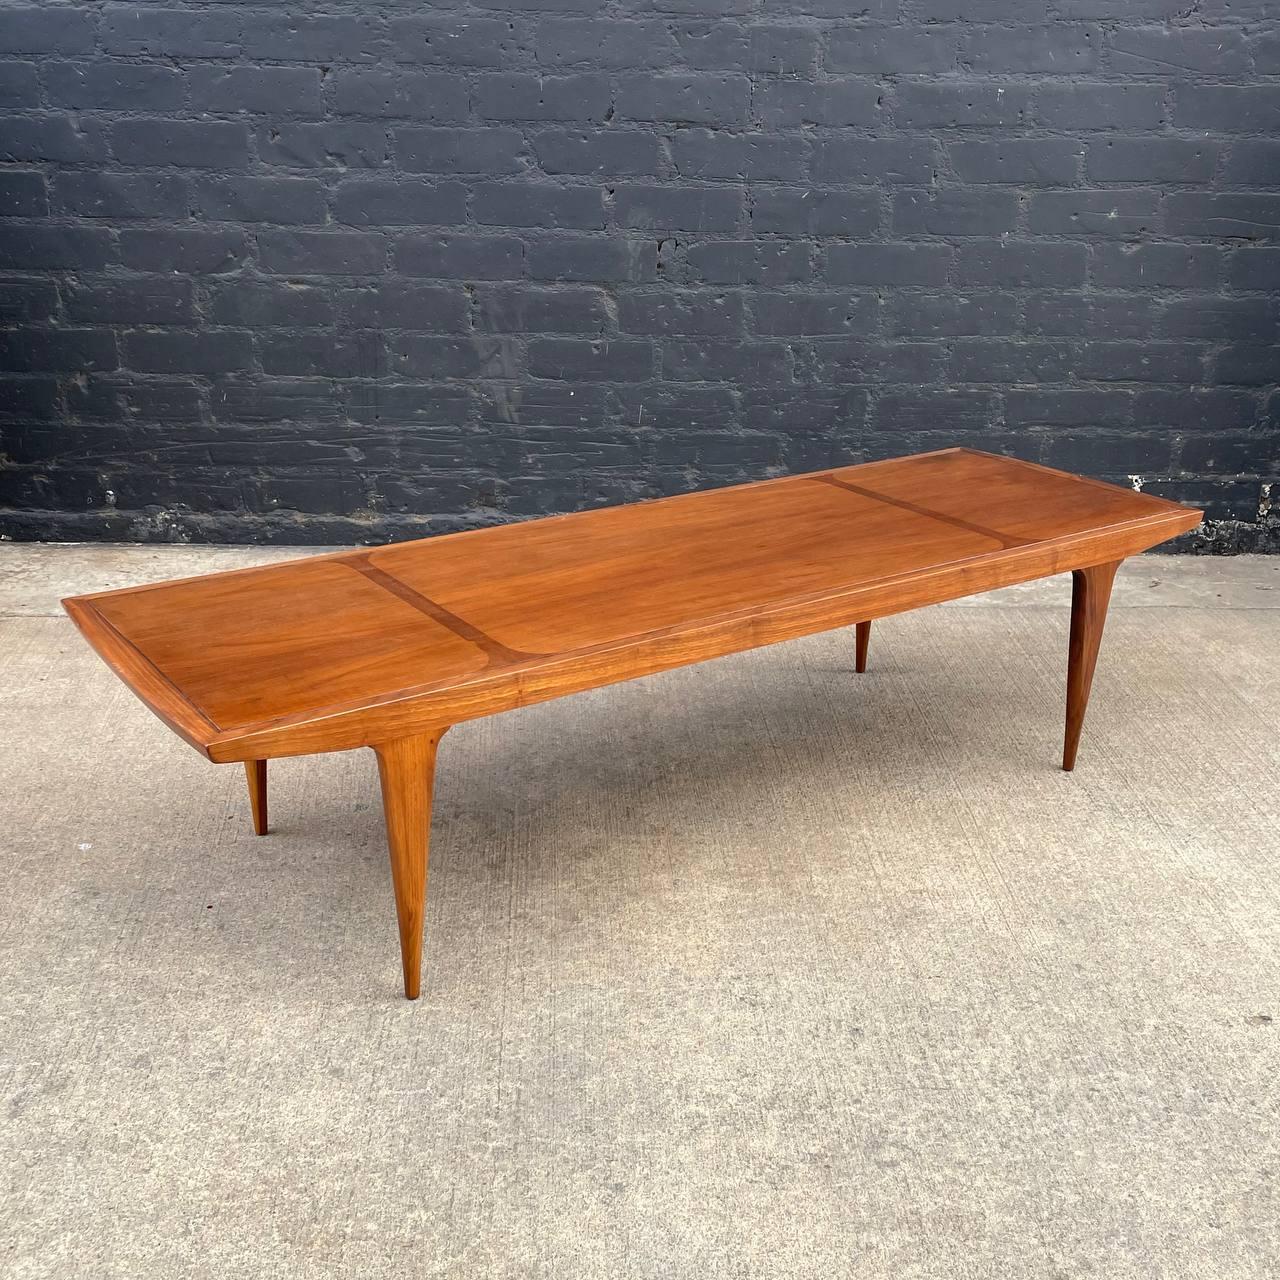 Newly Refinished - Mid-Century Modern Sculpted Walnut Coffee Table

With over 15 years of experience, our workshop has followed a careful process of restoration, showcasing our passion and creativity for vintage designs that can seamlessly be